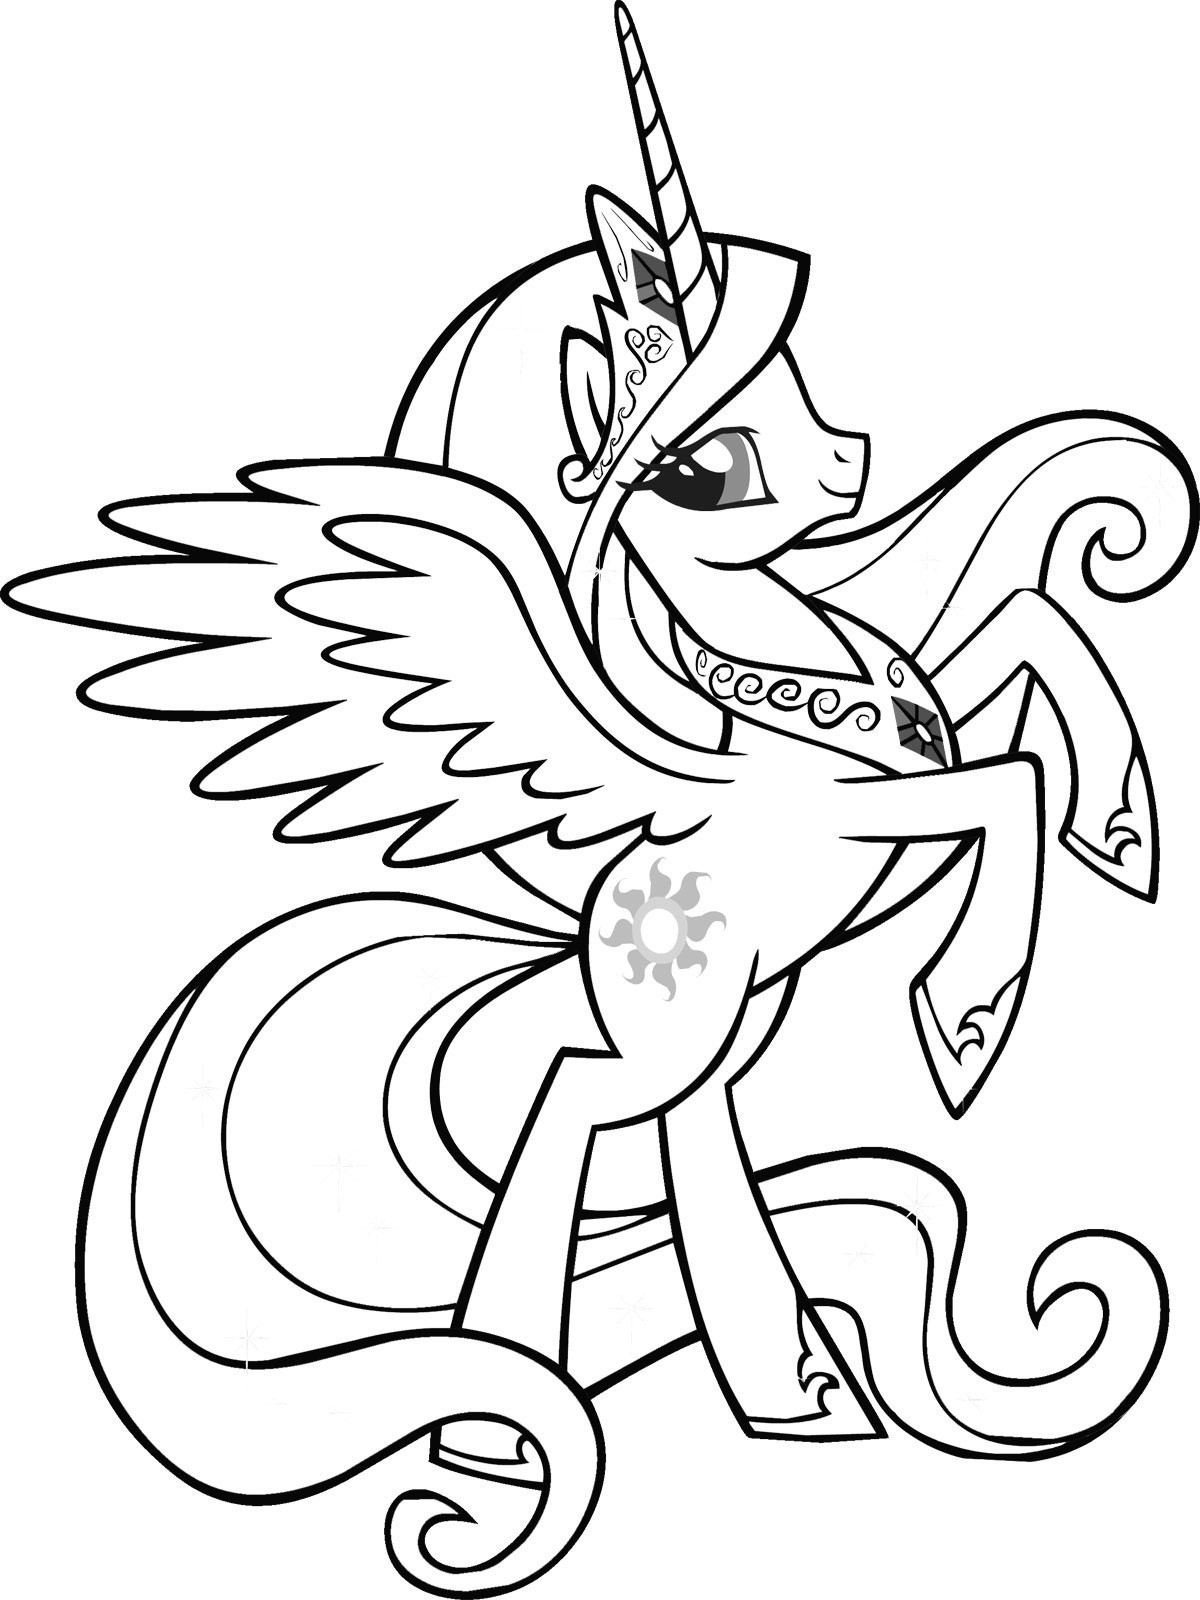 Coloring Sheets For Girls My Little Pony
 Free Printable My Little Pony Coloring Pages For Kids